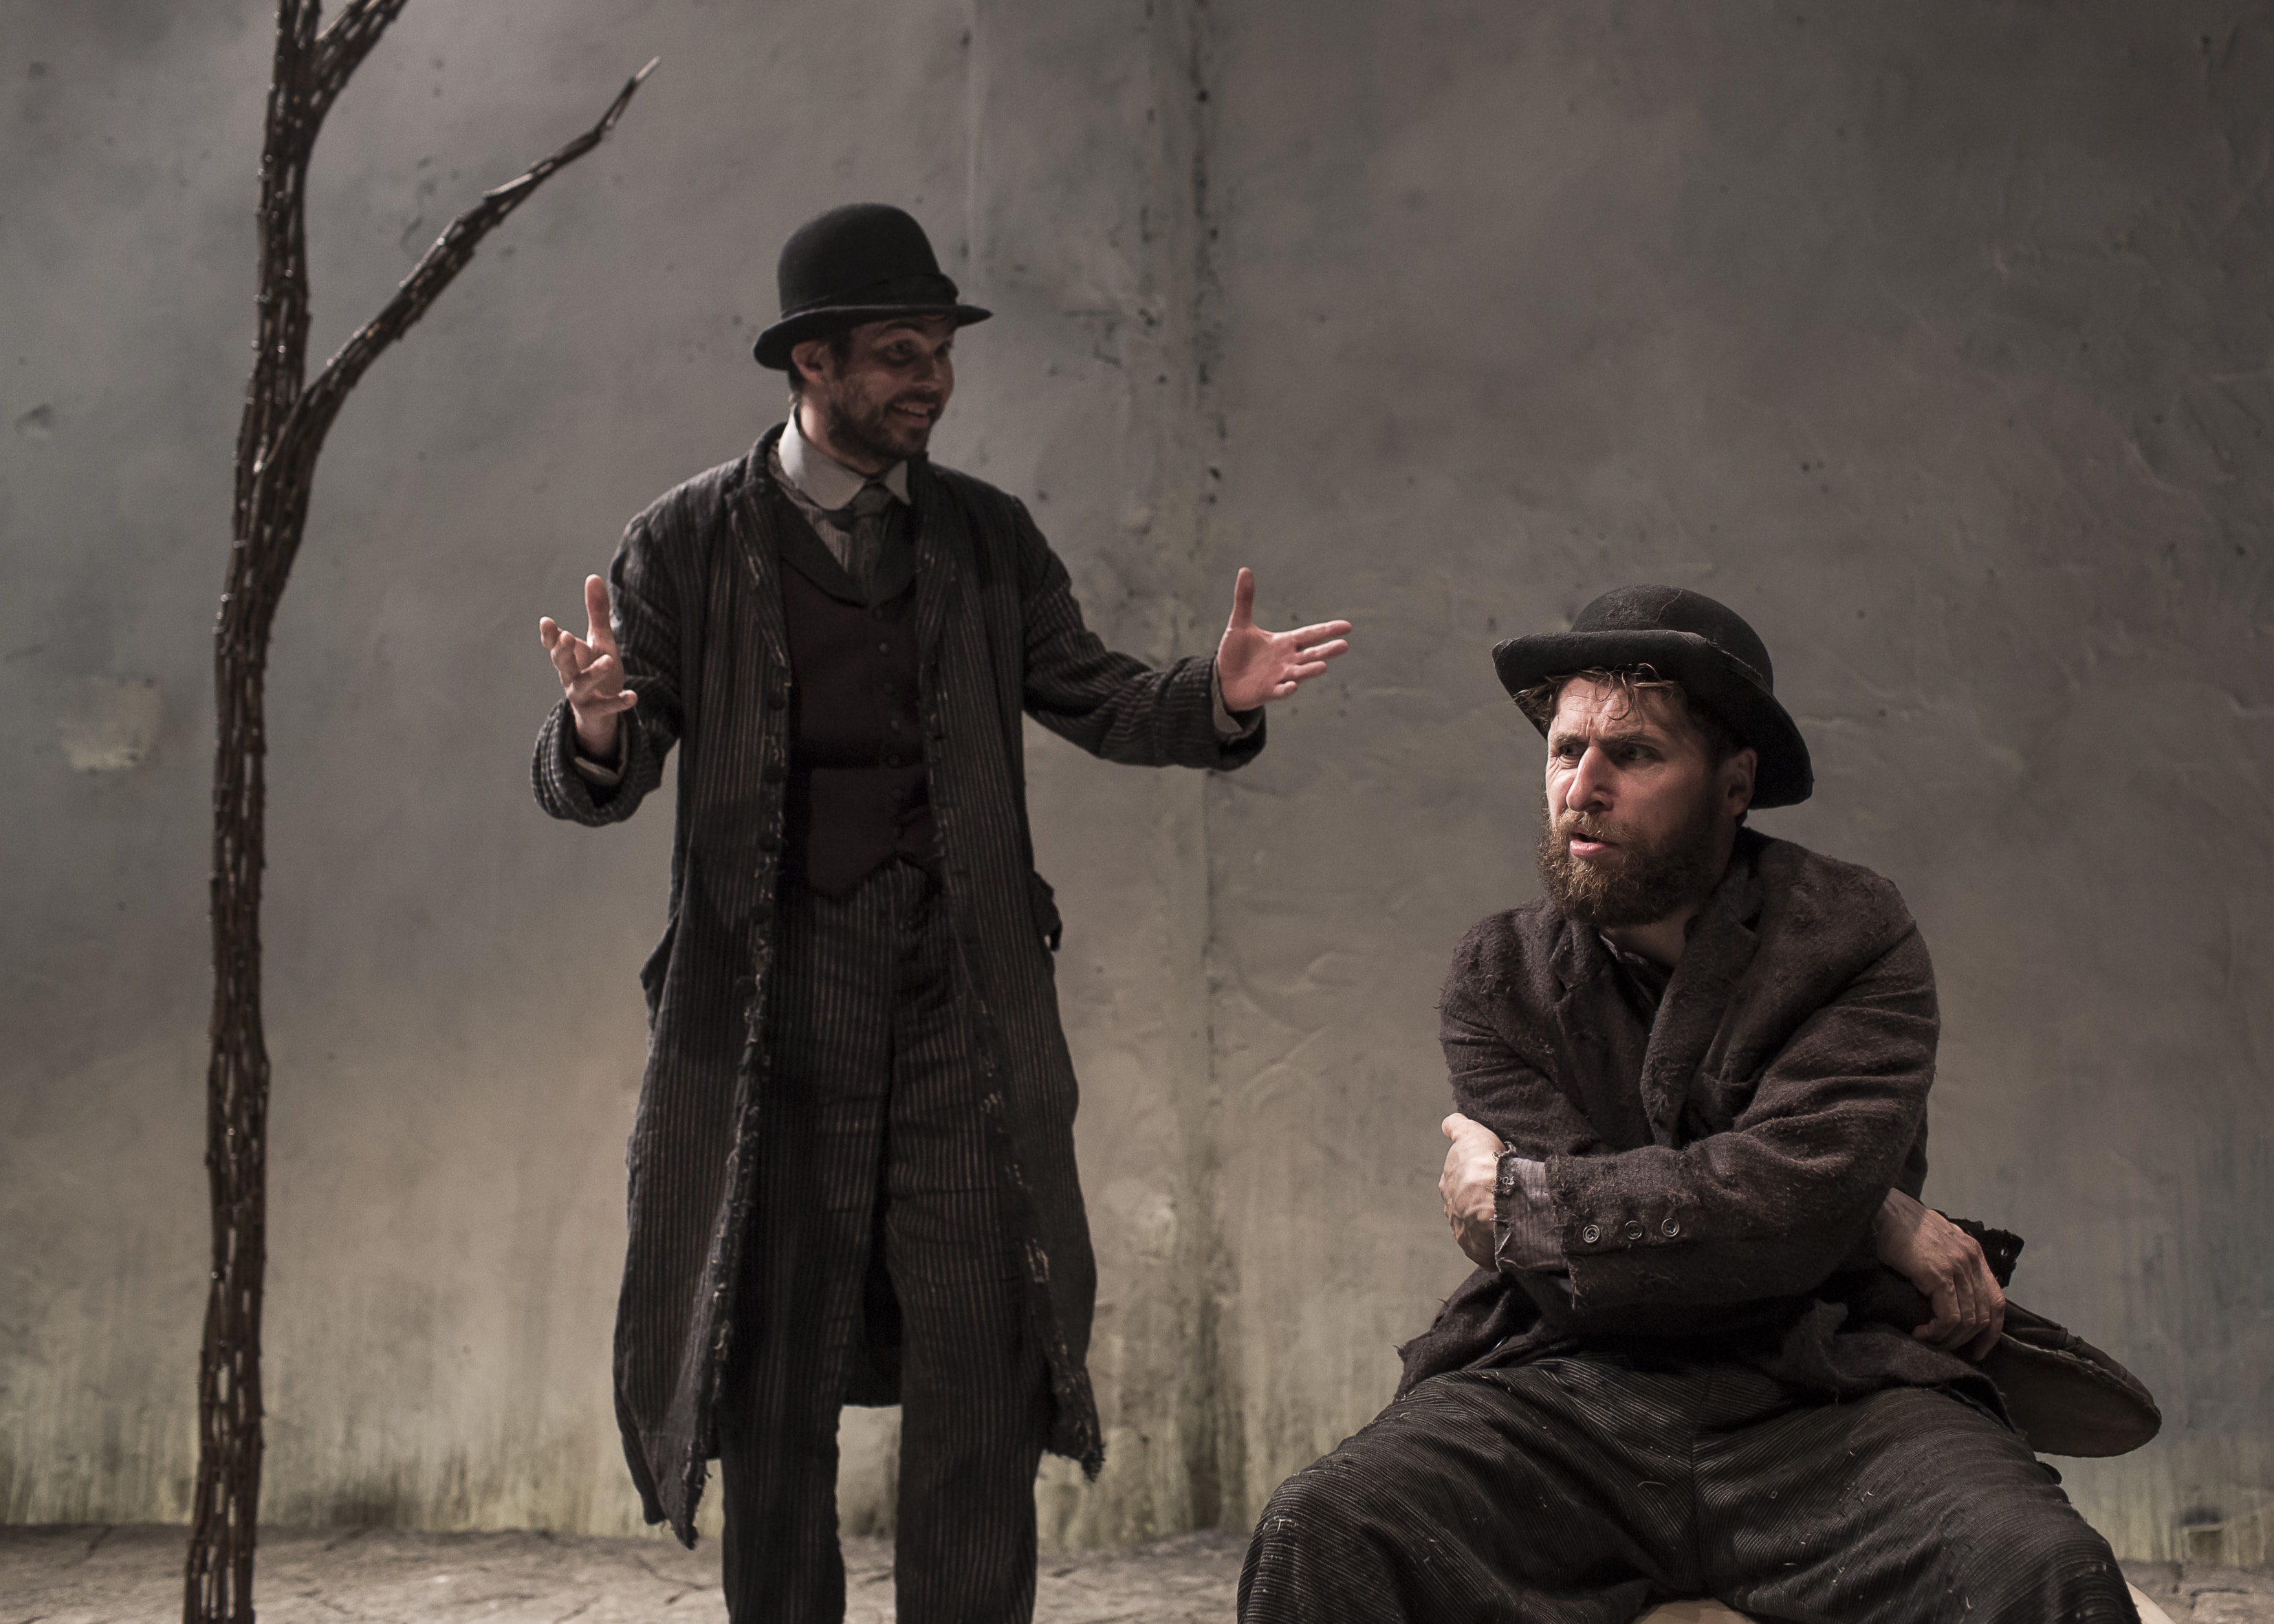 Marty Rea as Vladimir and Aaron Monaghan as Estragon in the Druid production of Waiting for Godot, directed by Garry Hynes. Photo by Matthew Thompson.